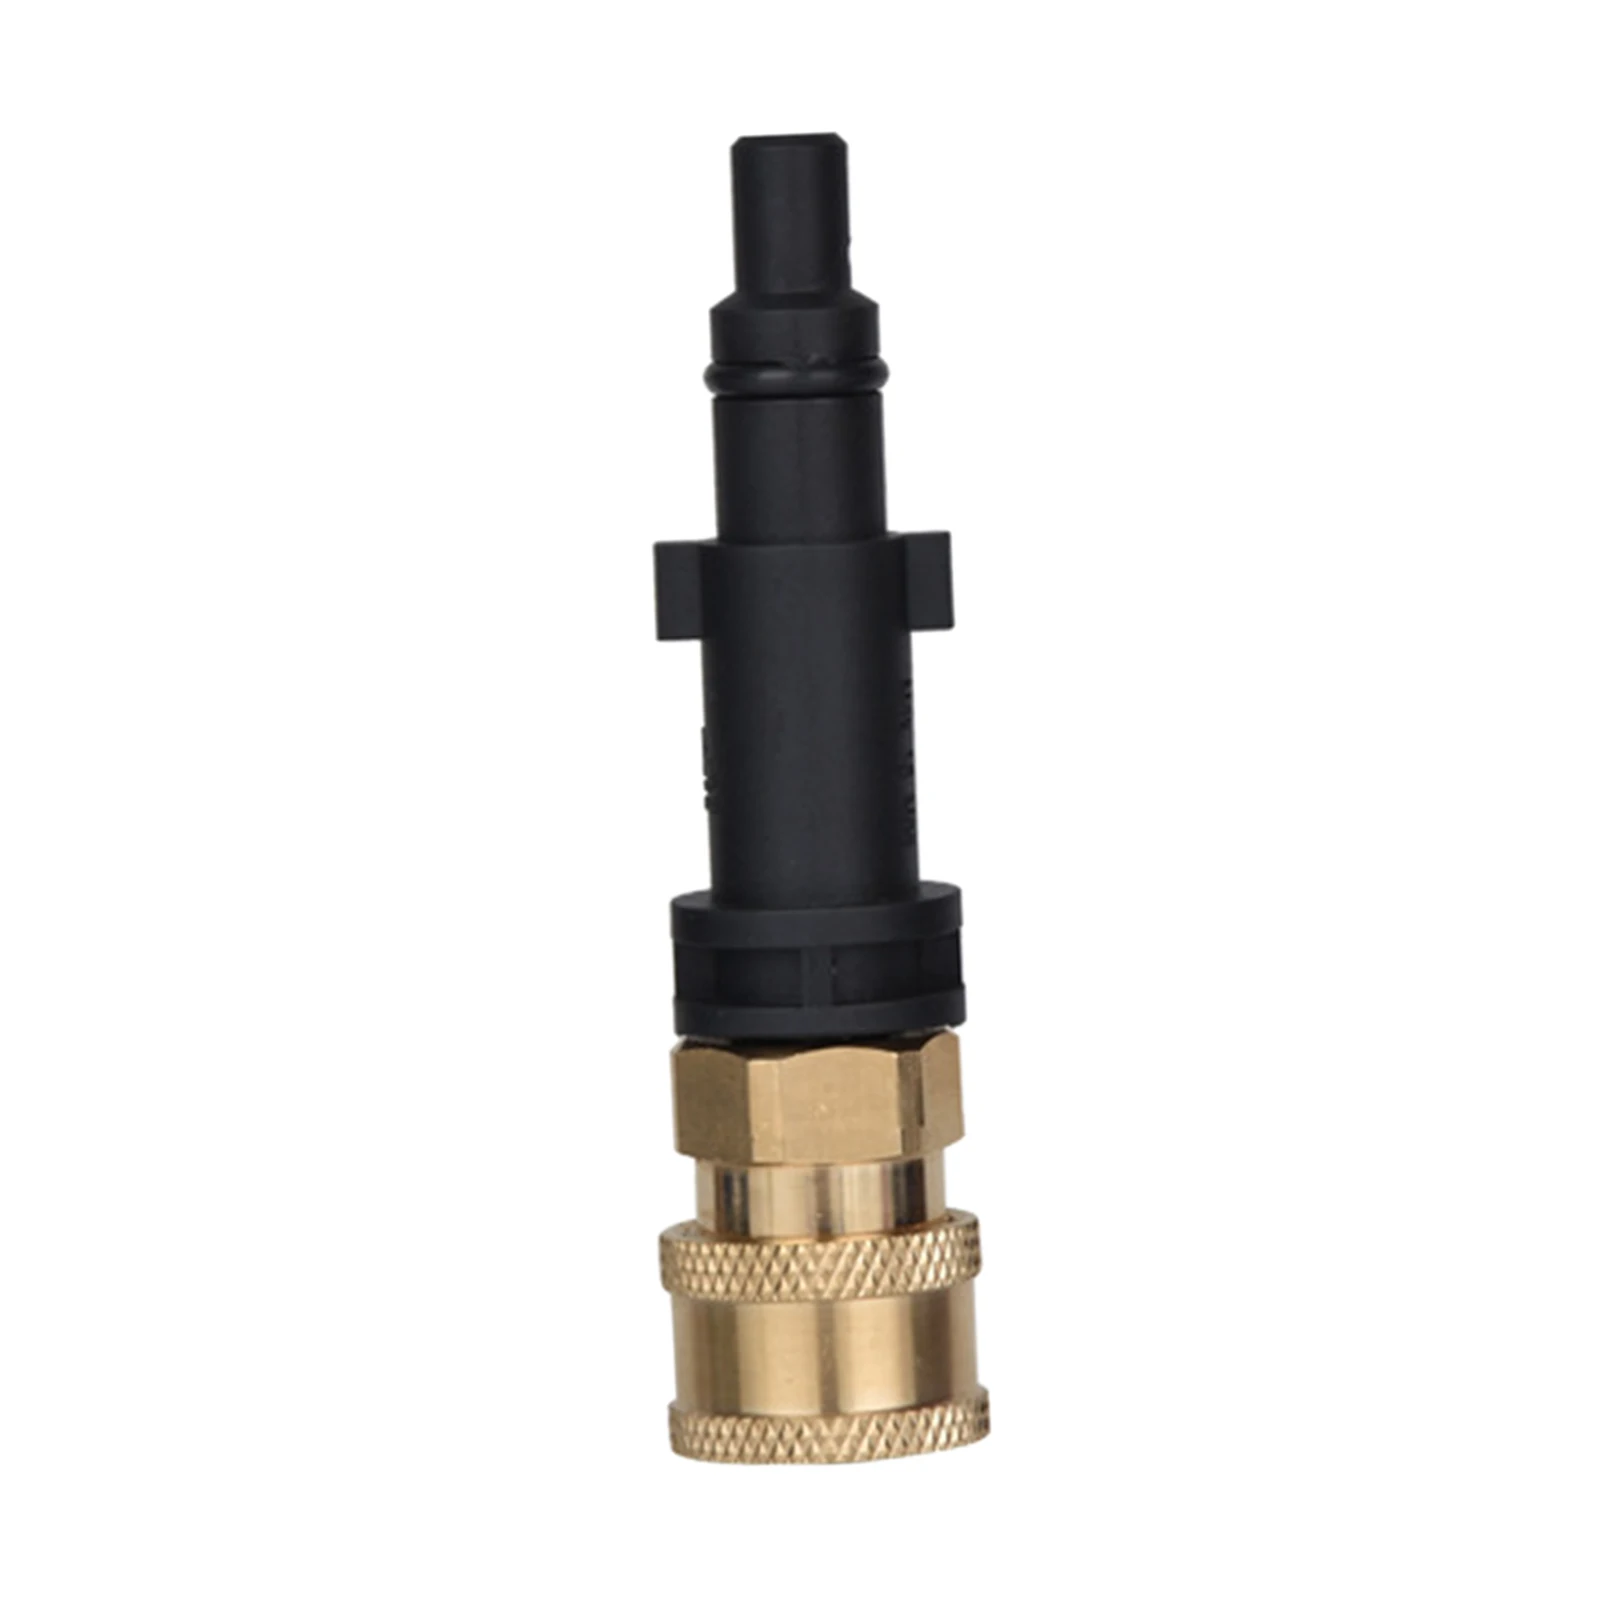 High Pressure Washer Hose Adapter 1/4 Quick Disconnect Foam Nozzle Power Washer Outlet Fitting Pressure Washer Hose Accessory